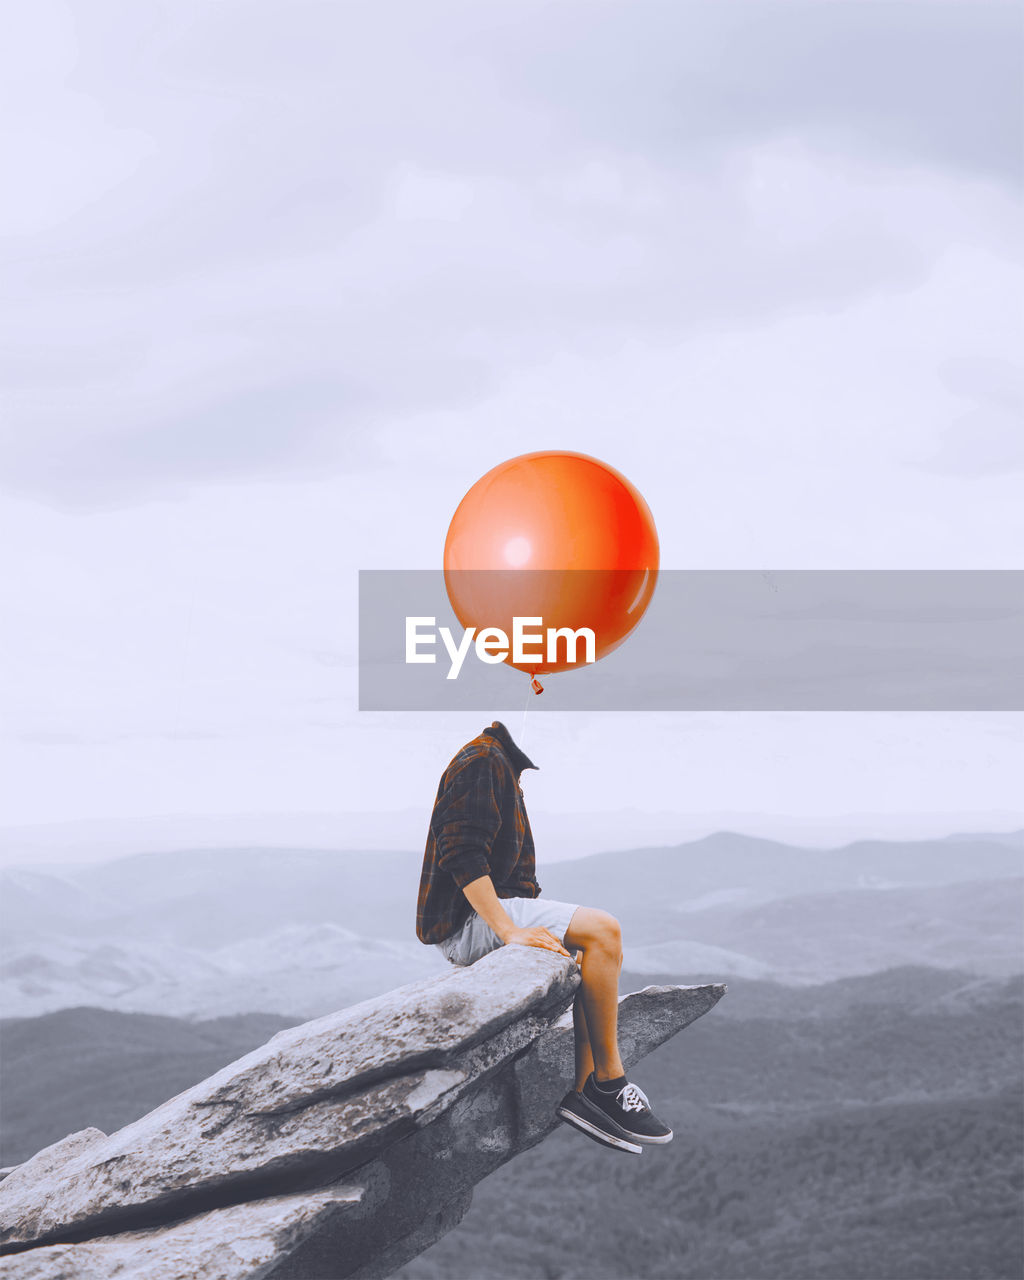 Digital composite image of decapitated man with balloon sitting on rock against sky